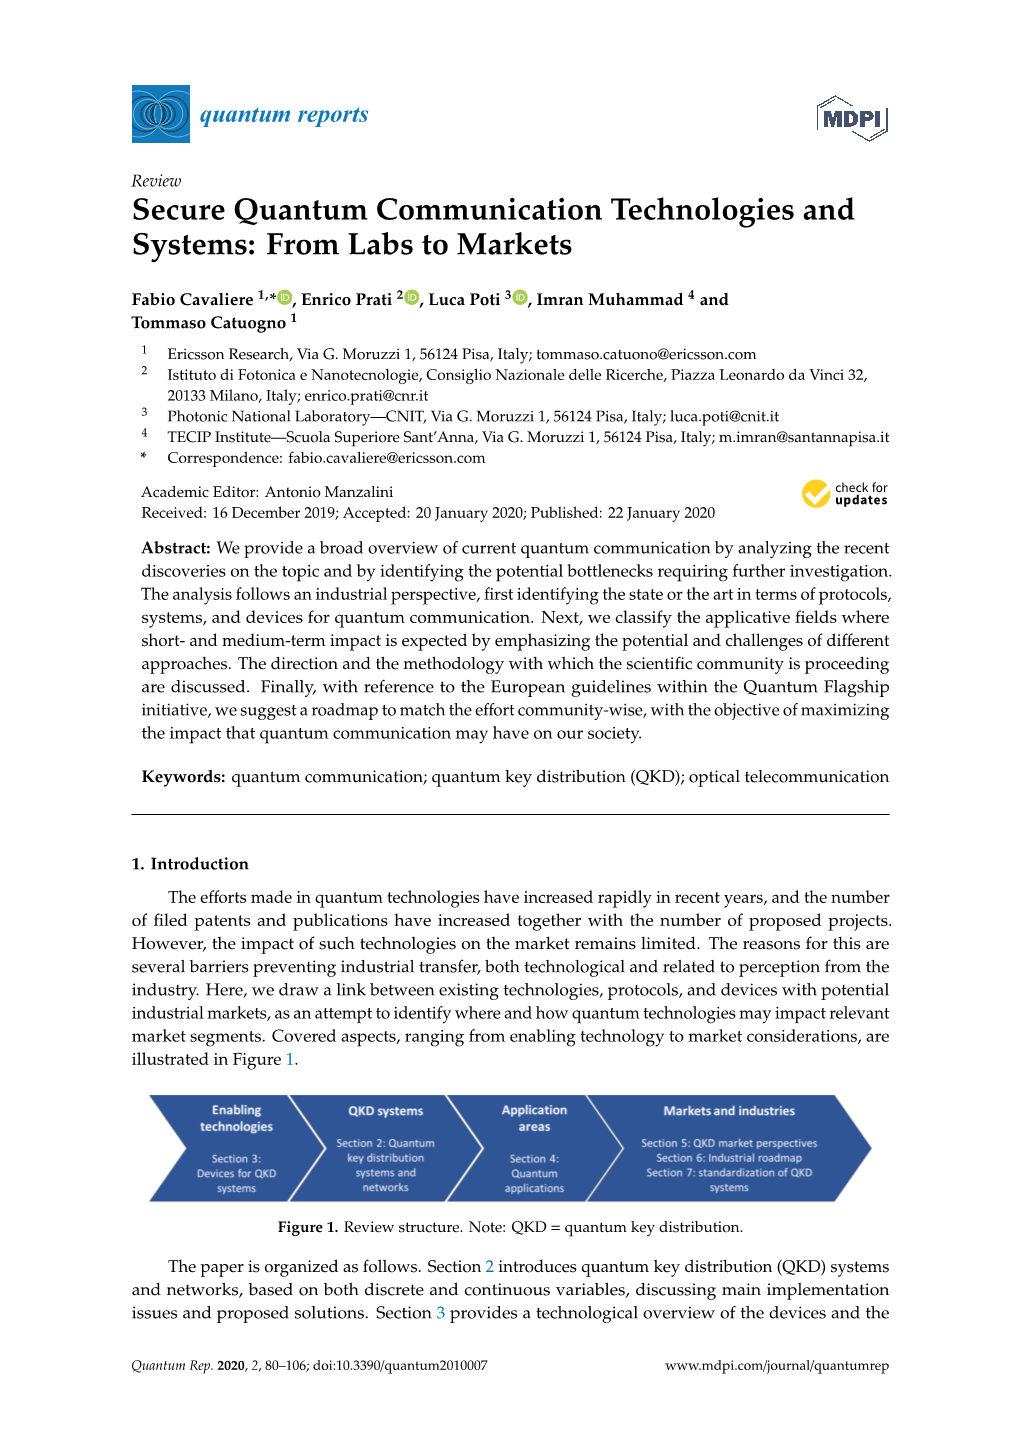 Secure Quantum Communication Technologies and Systems: from Labs to Markets